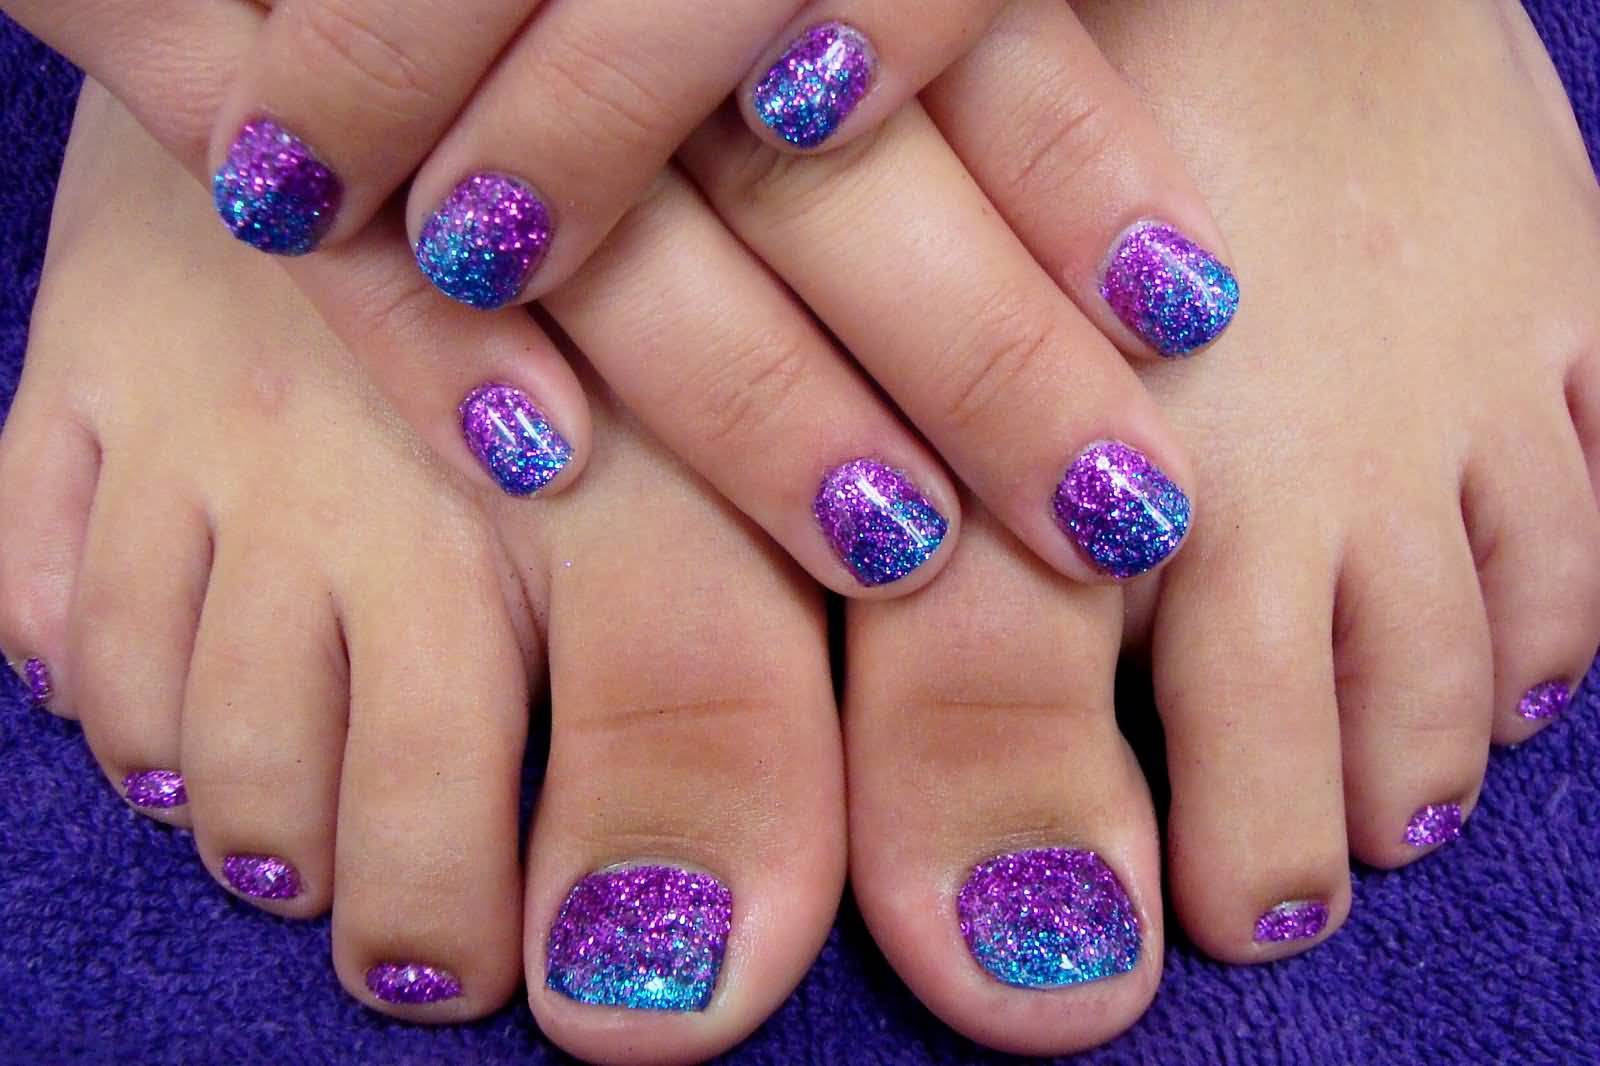 5. Geometric Nail and Toe Design for Spring - wide 4